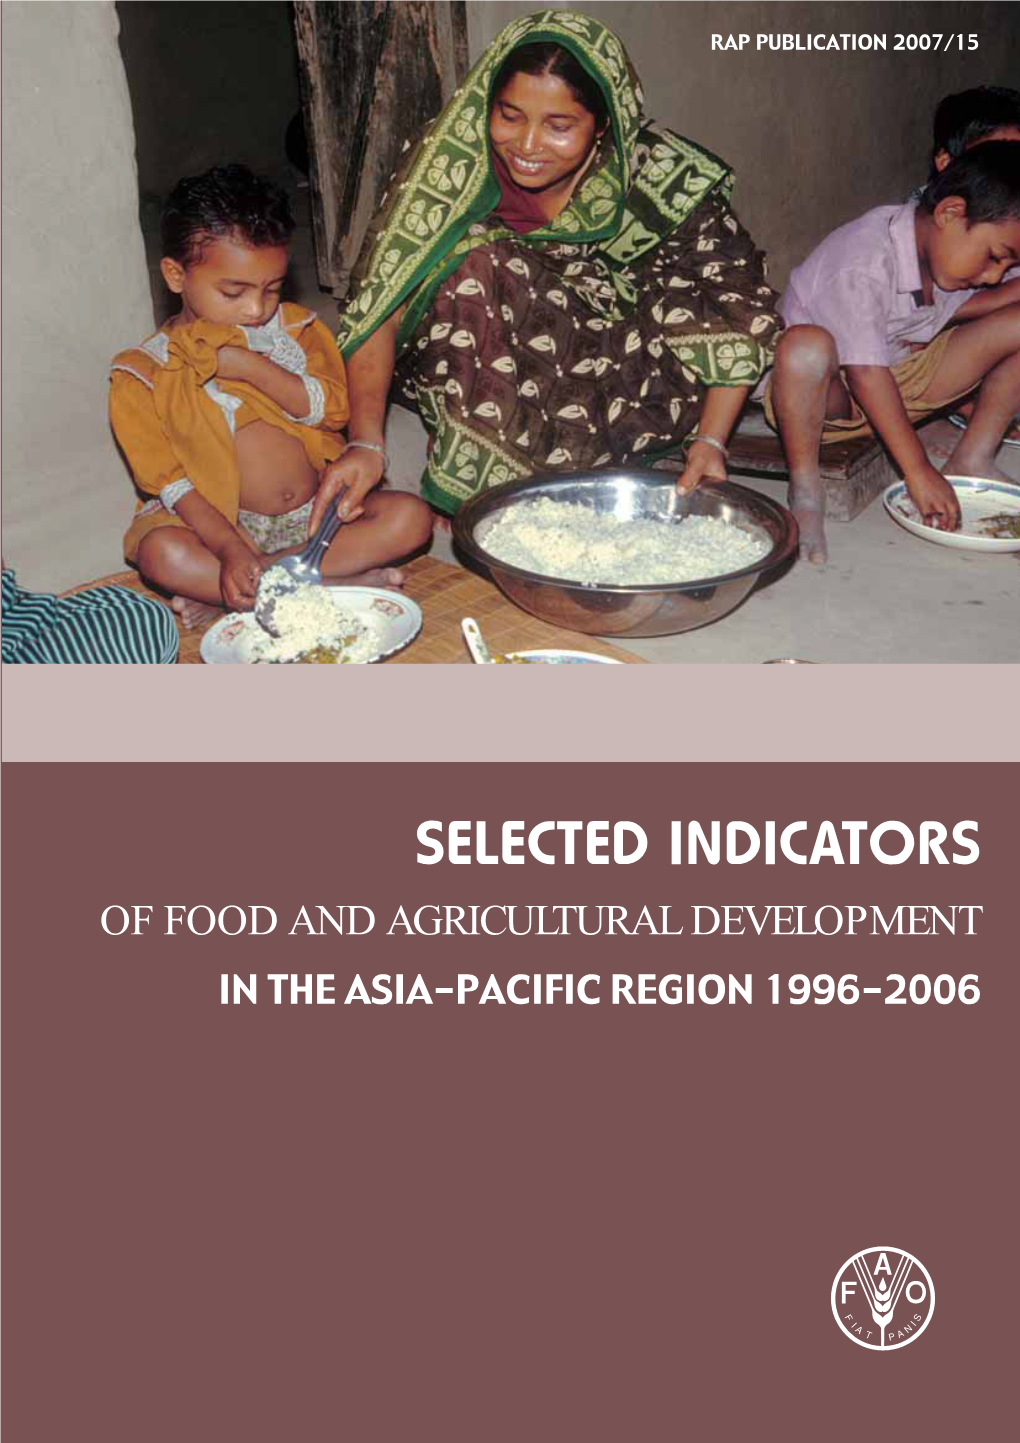 SELECTED INDICATORS of FOOD and AGRICULTURAL DEVELOPMENT Make It Happenin the ASIA-PACIFIC REGION 1996-2006 RAP PUBLICATION 2007/15